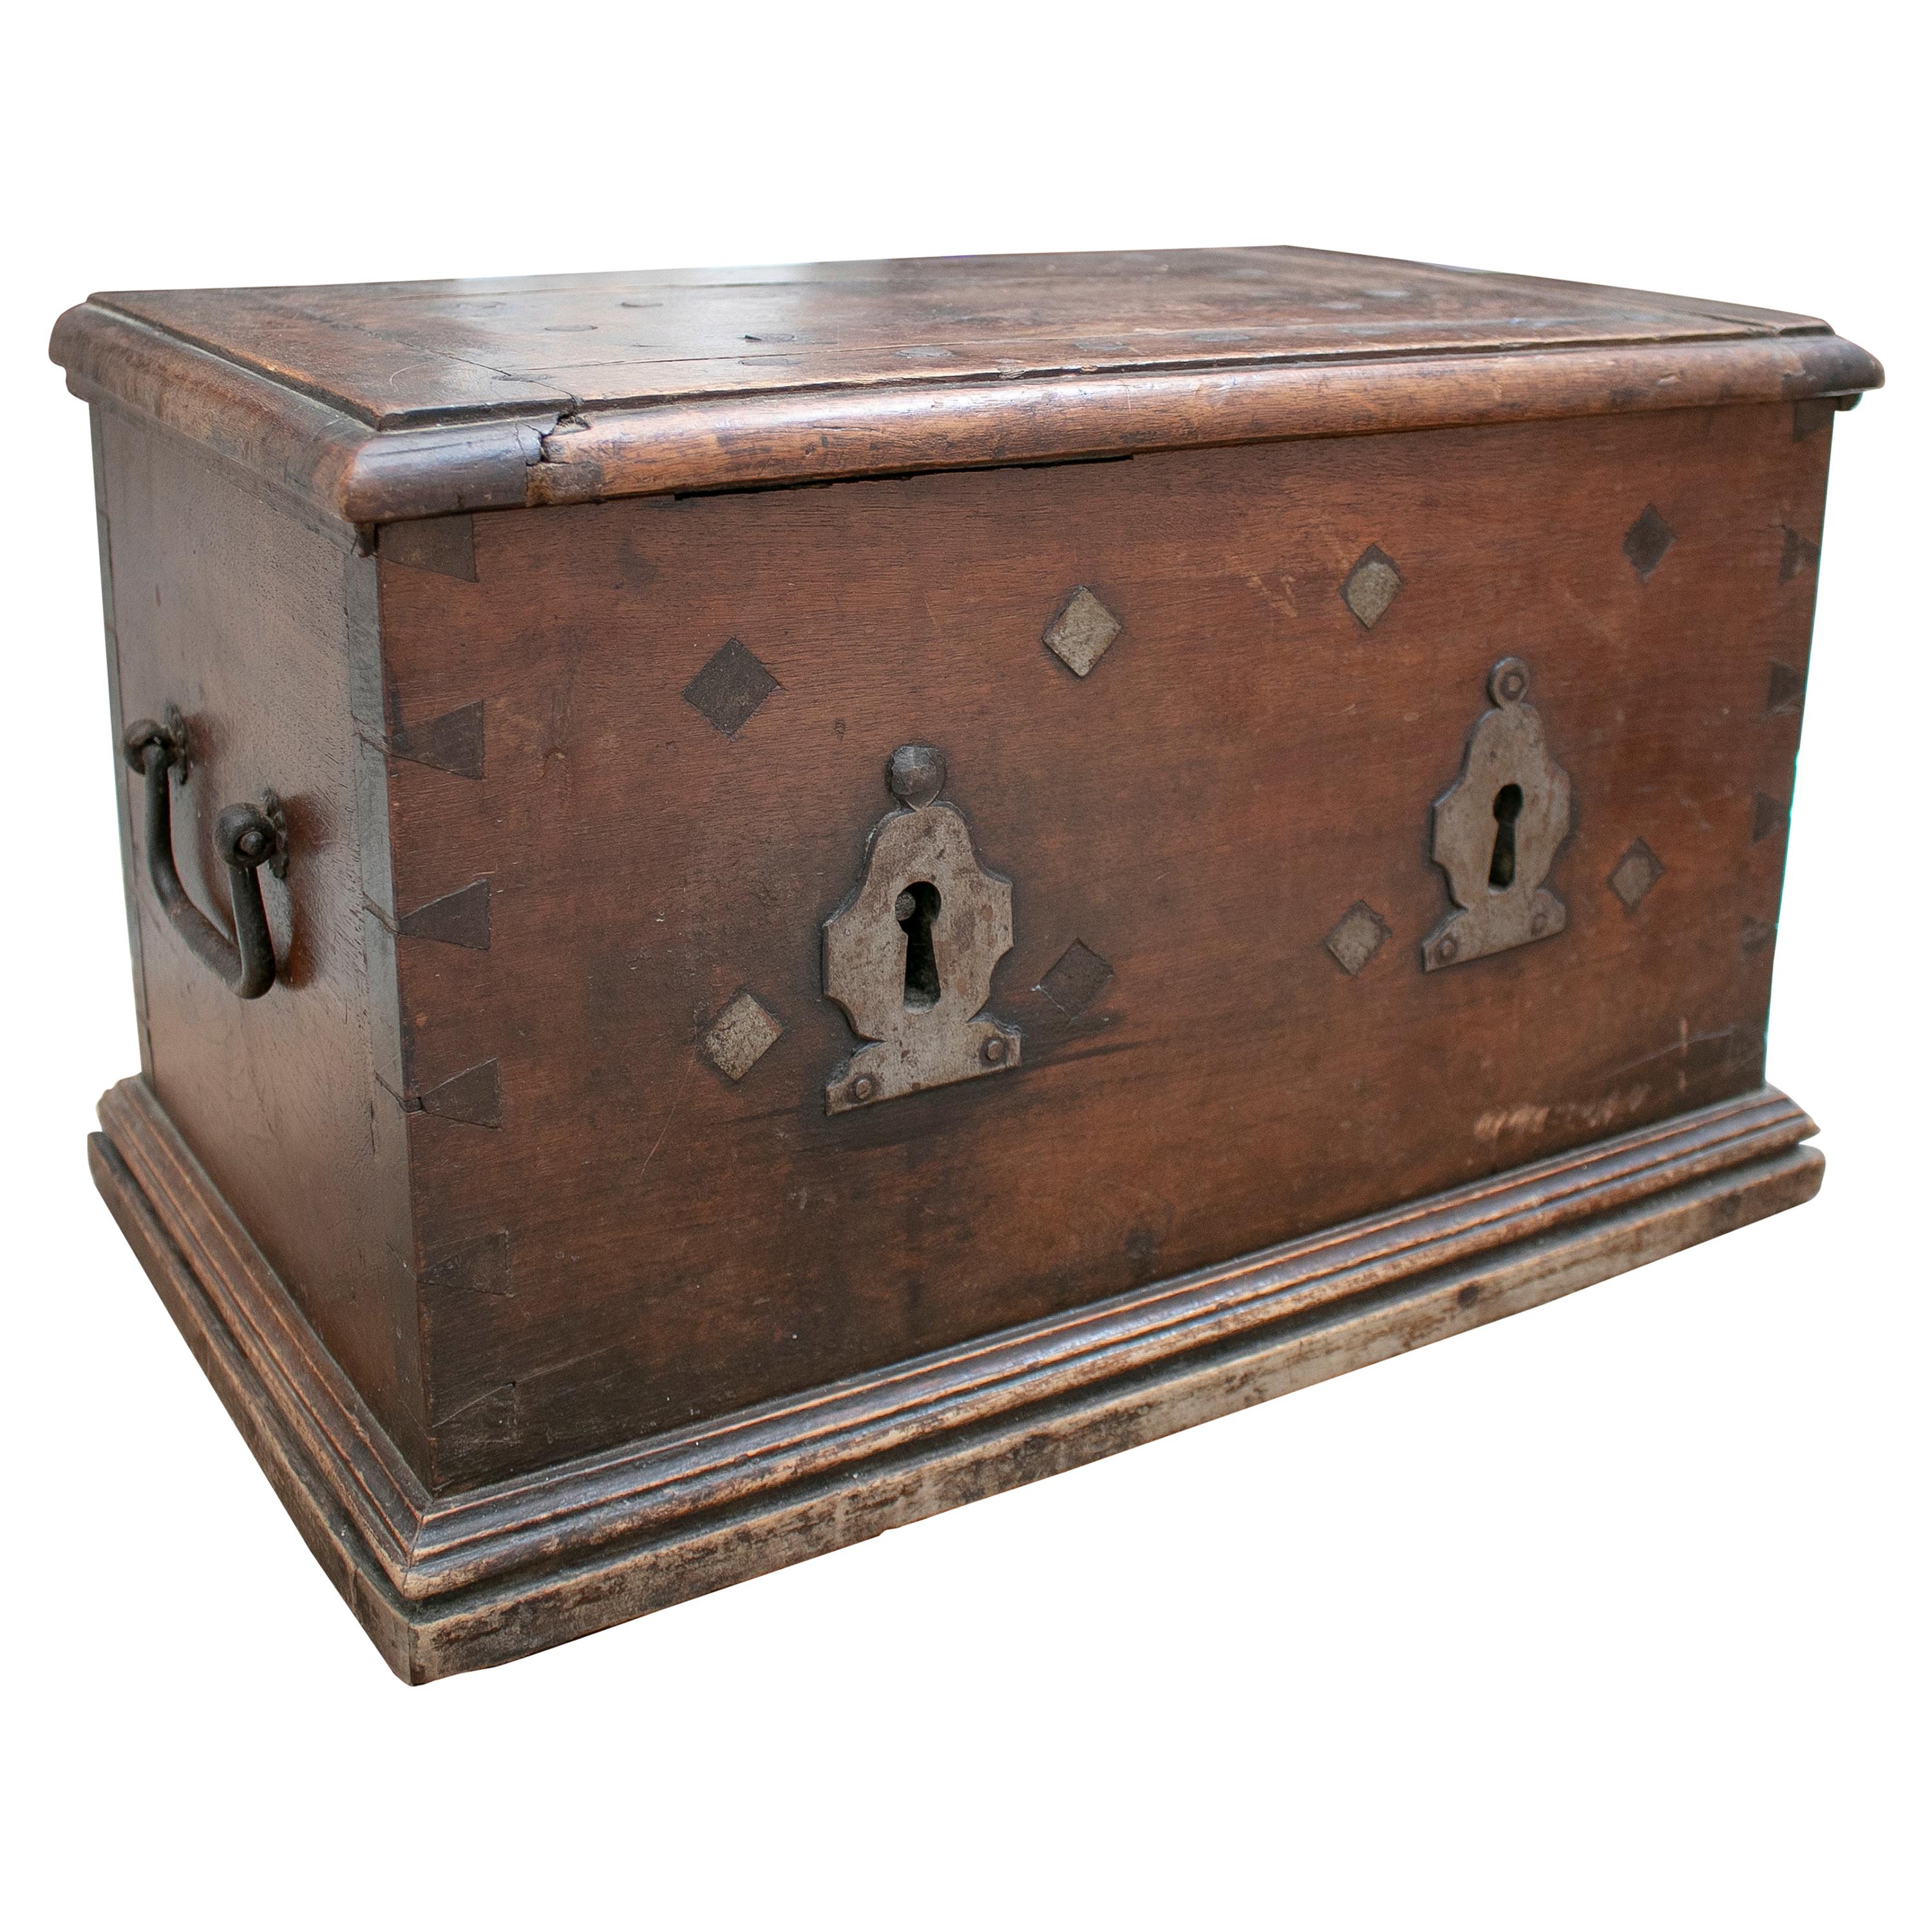 18th Century Spanish Walnut Strongbox Safe with Two Locks and Iron Fittings